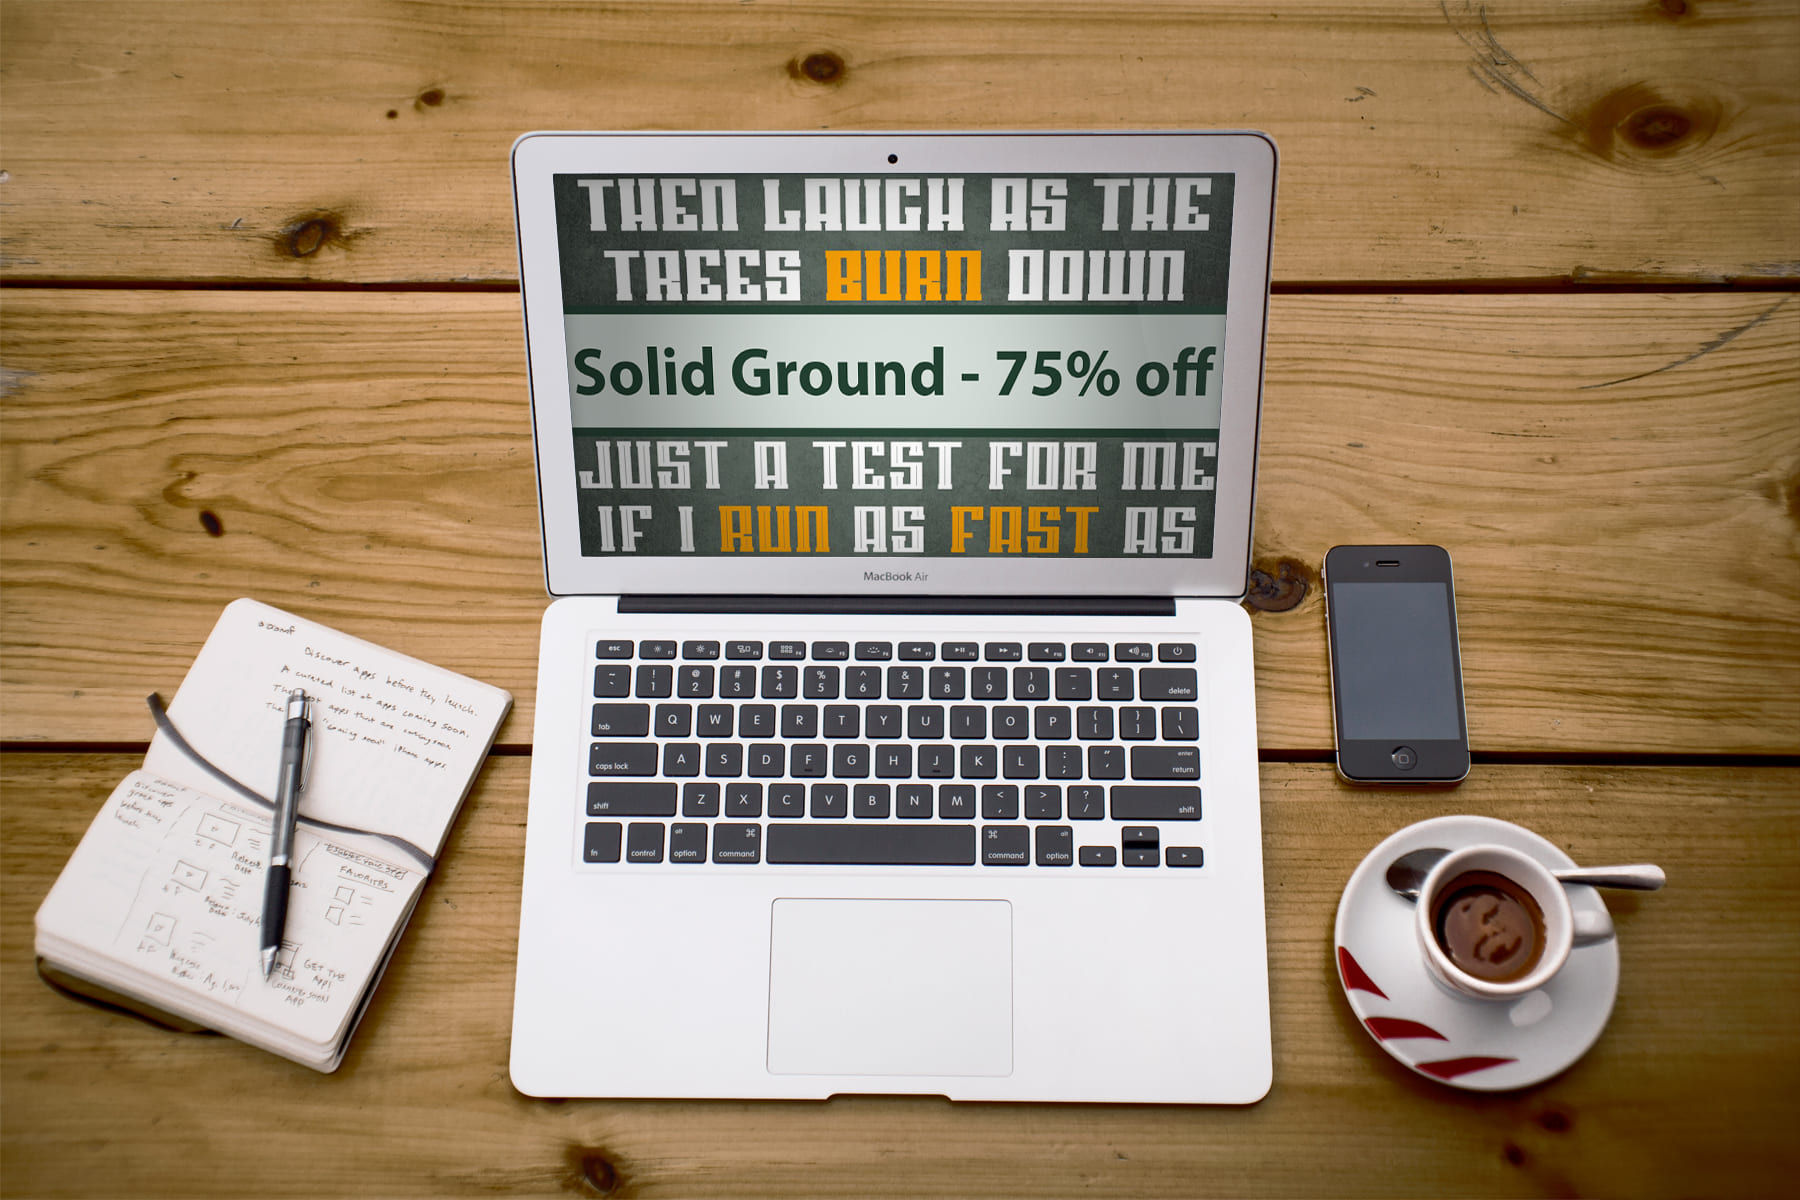 Laptop option of the Solid Ground - 75% off.